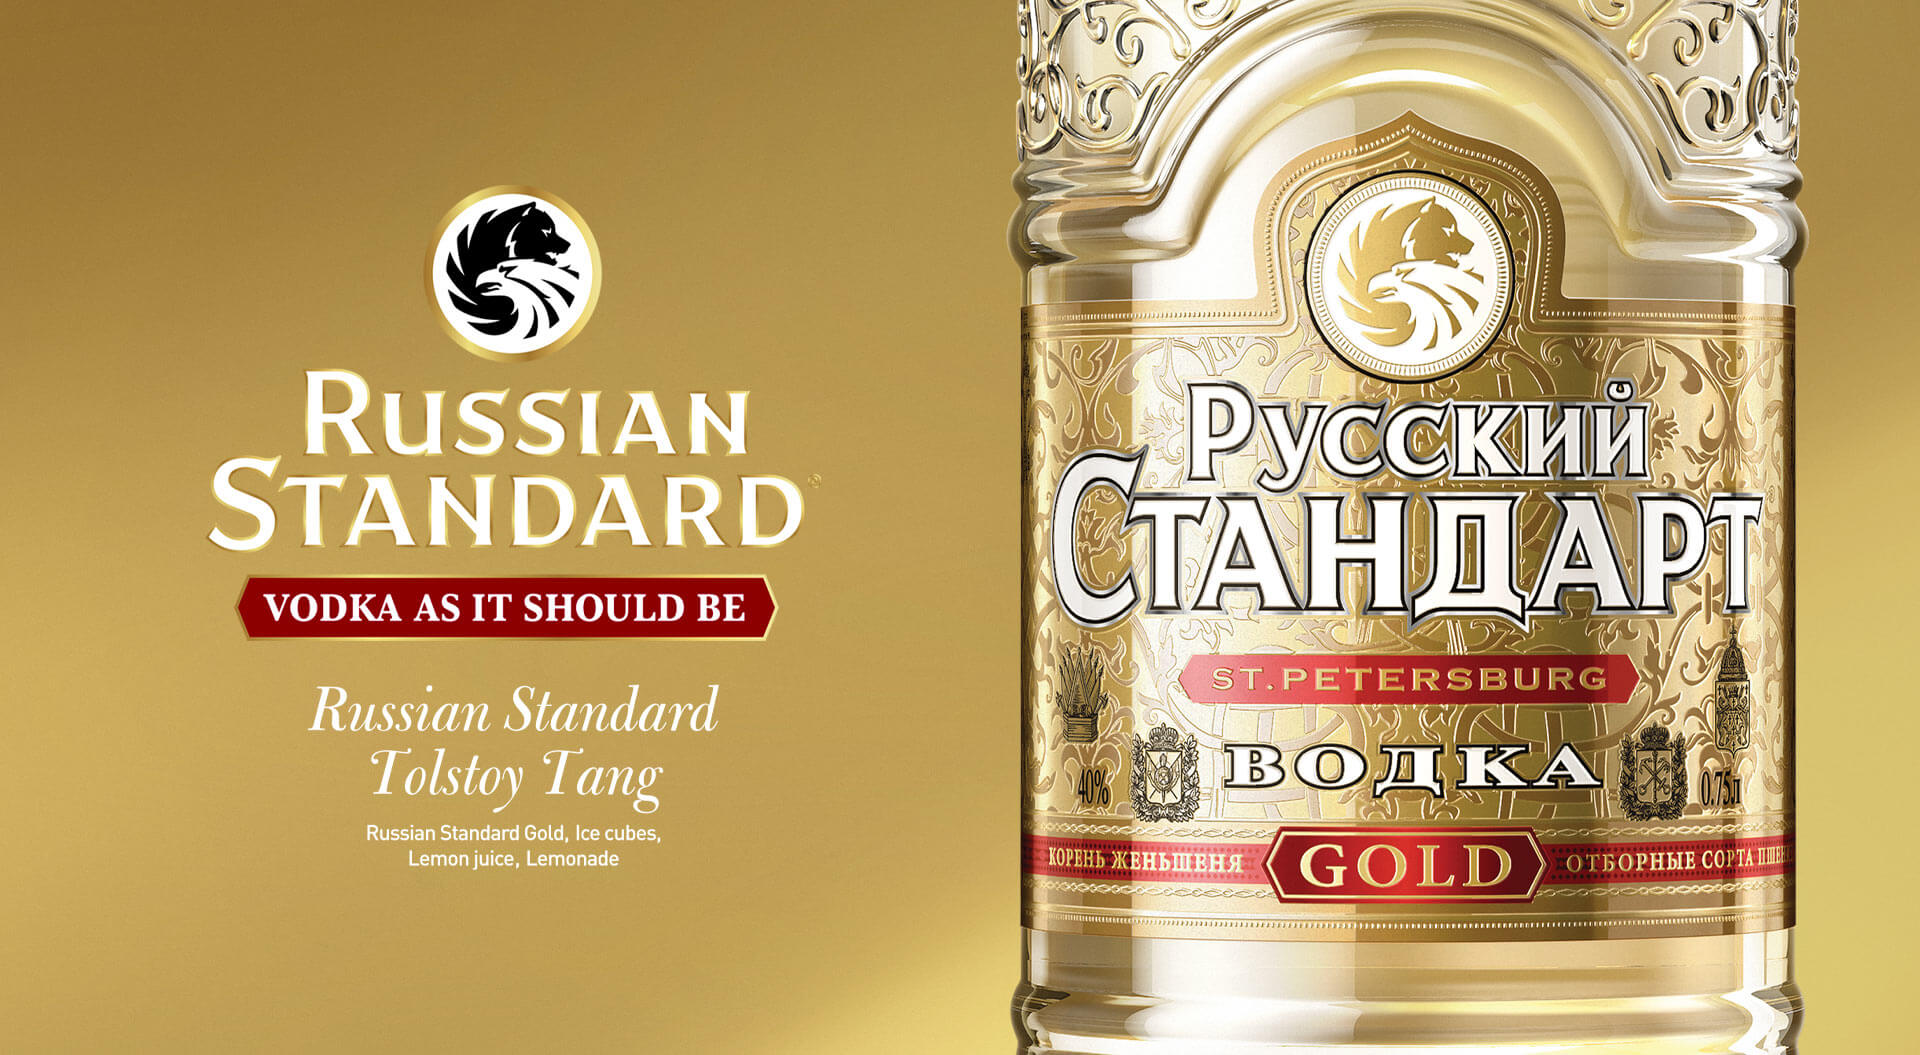 Spirits industry promotion campaigns travel retail, strategy marketing, retail design, airports, duty-free alcohol marketing, innovative concepts ideas travel retail design, brand  Russian Standard Vodka